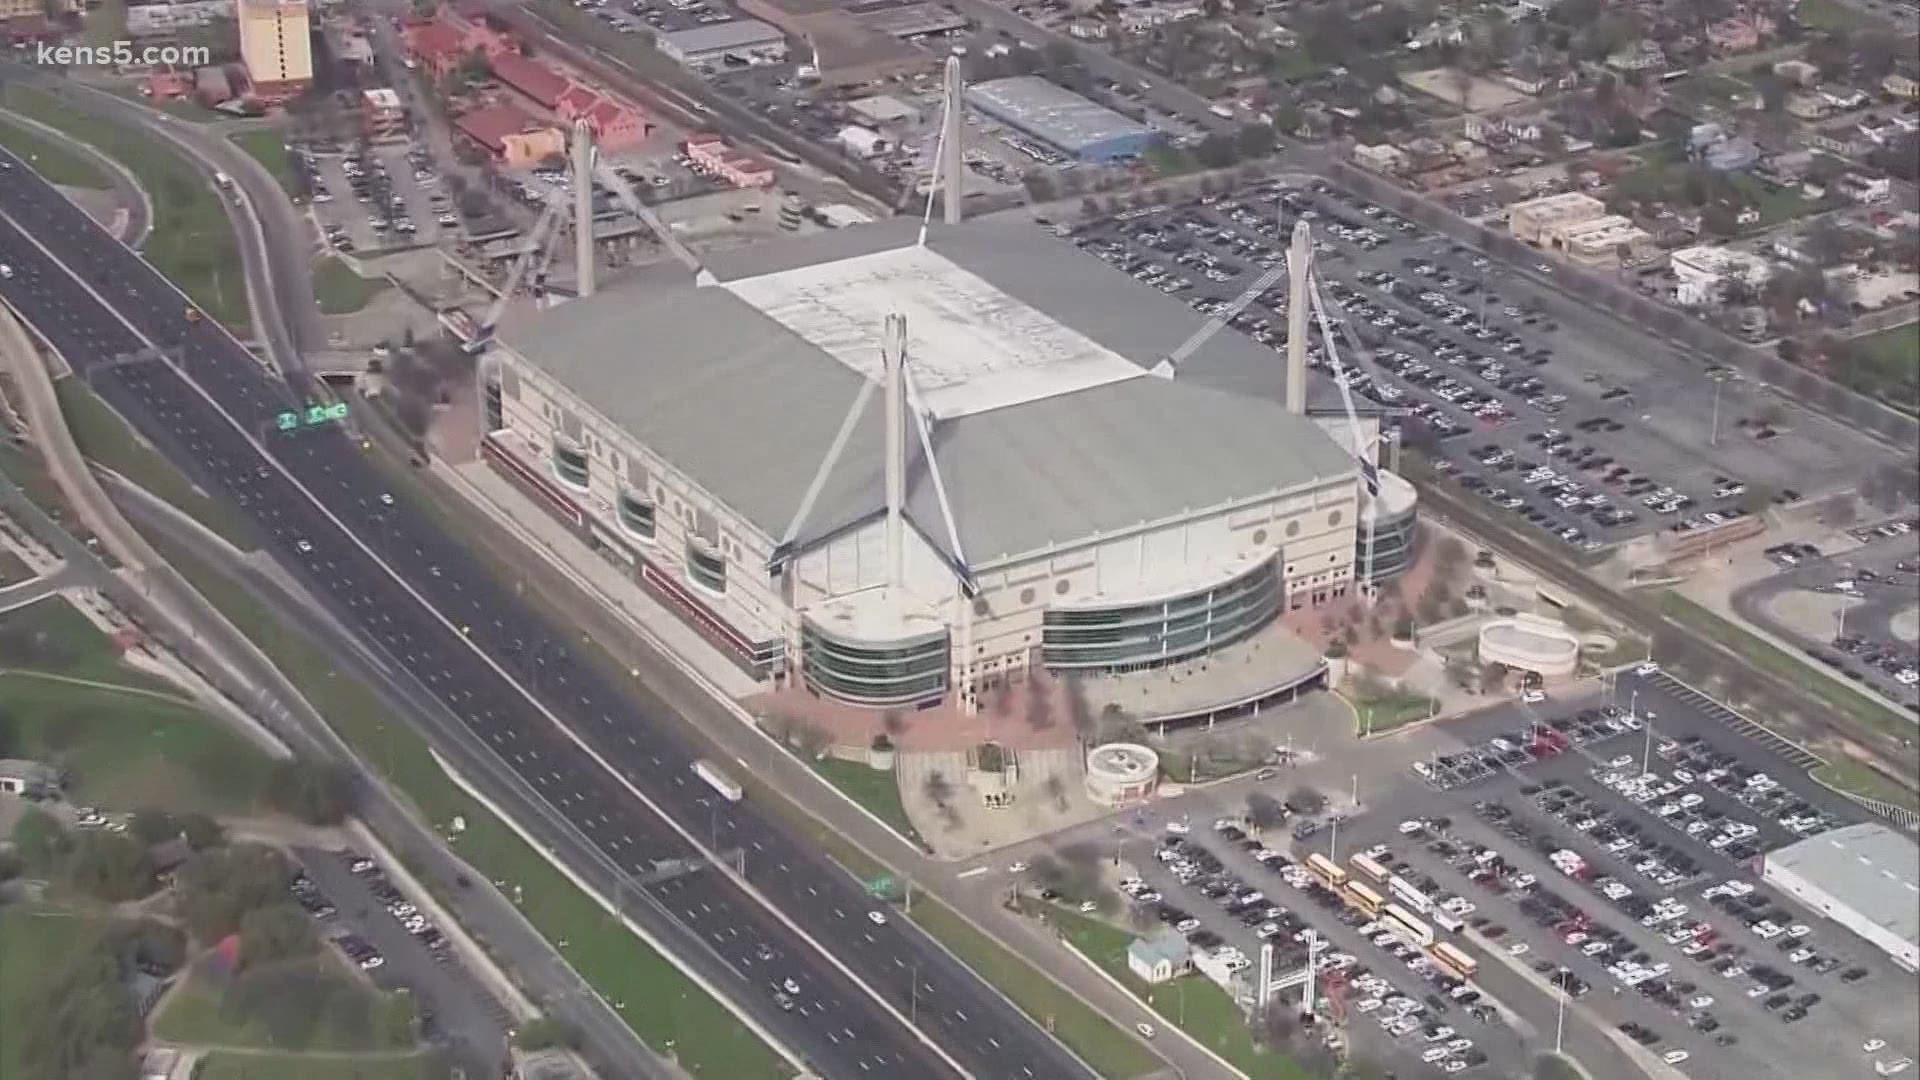 Thousands of COVID-19 vaccines are being administered at the Alamodome every day this week. The city say they expect shipments to keep the site open indefinitely.